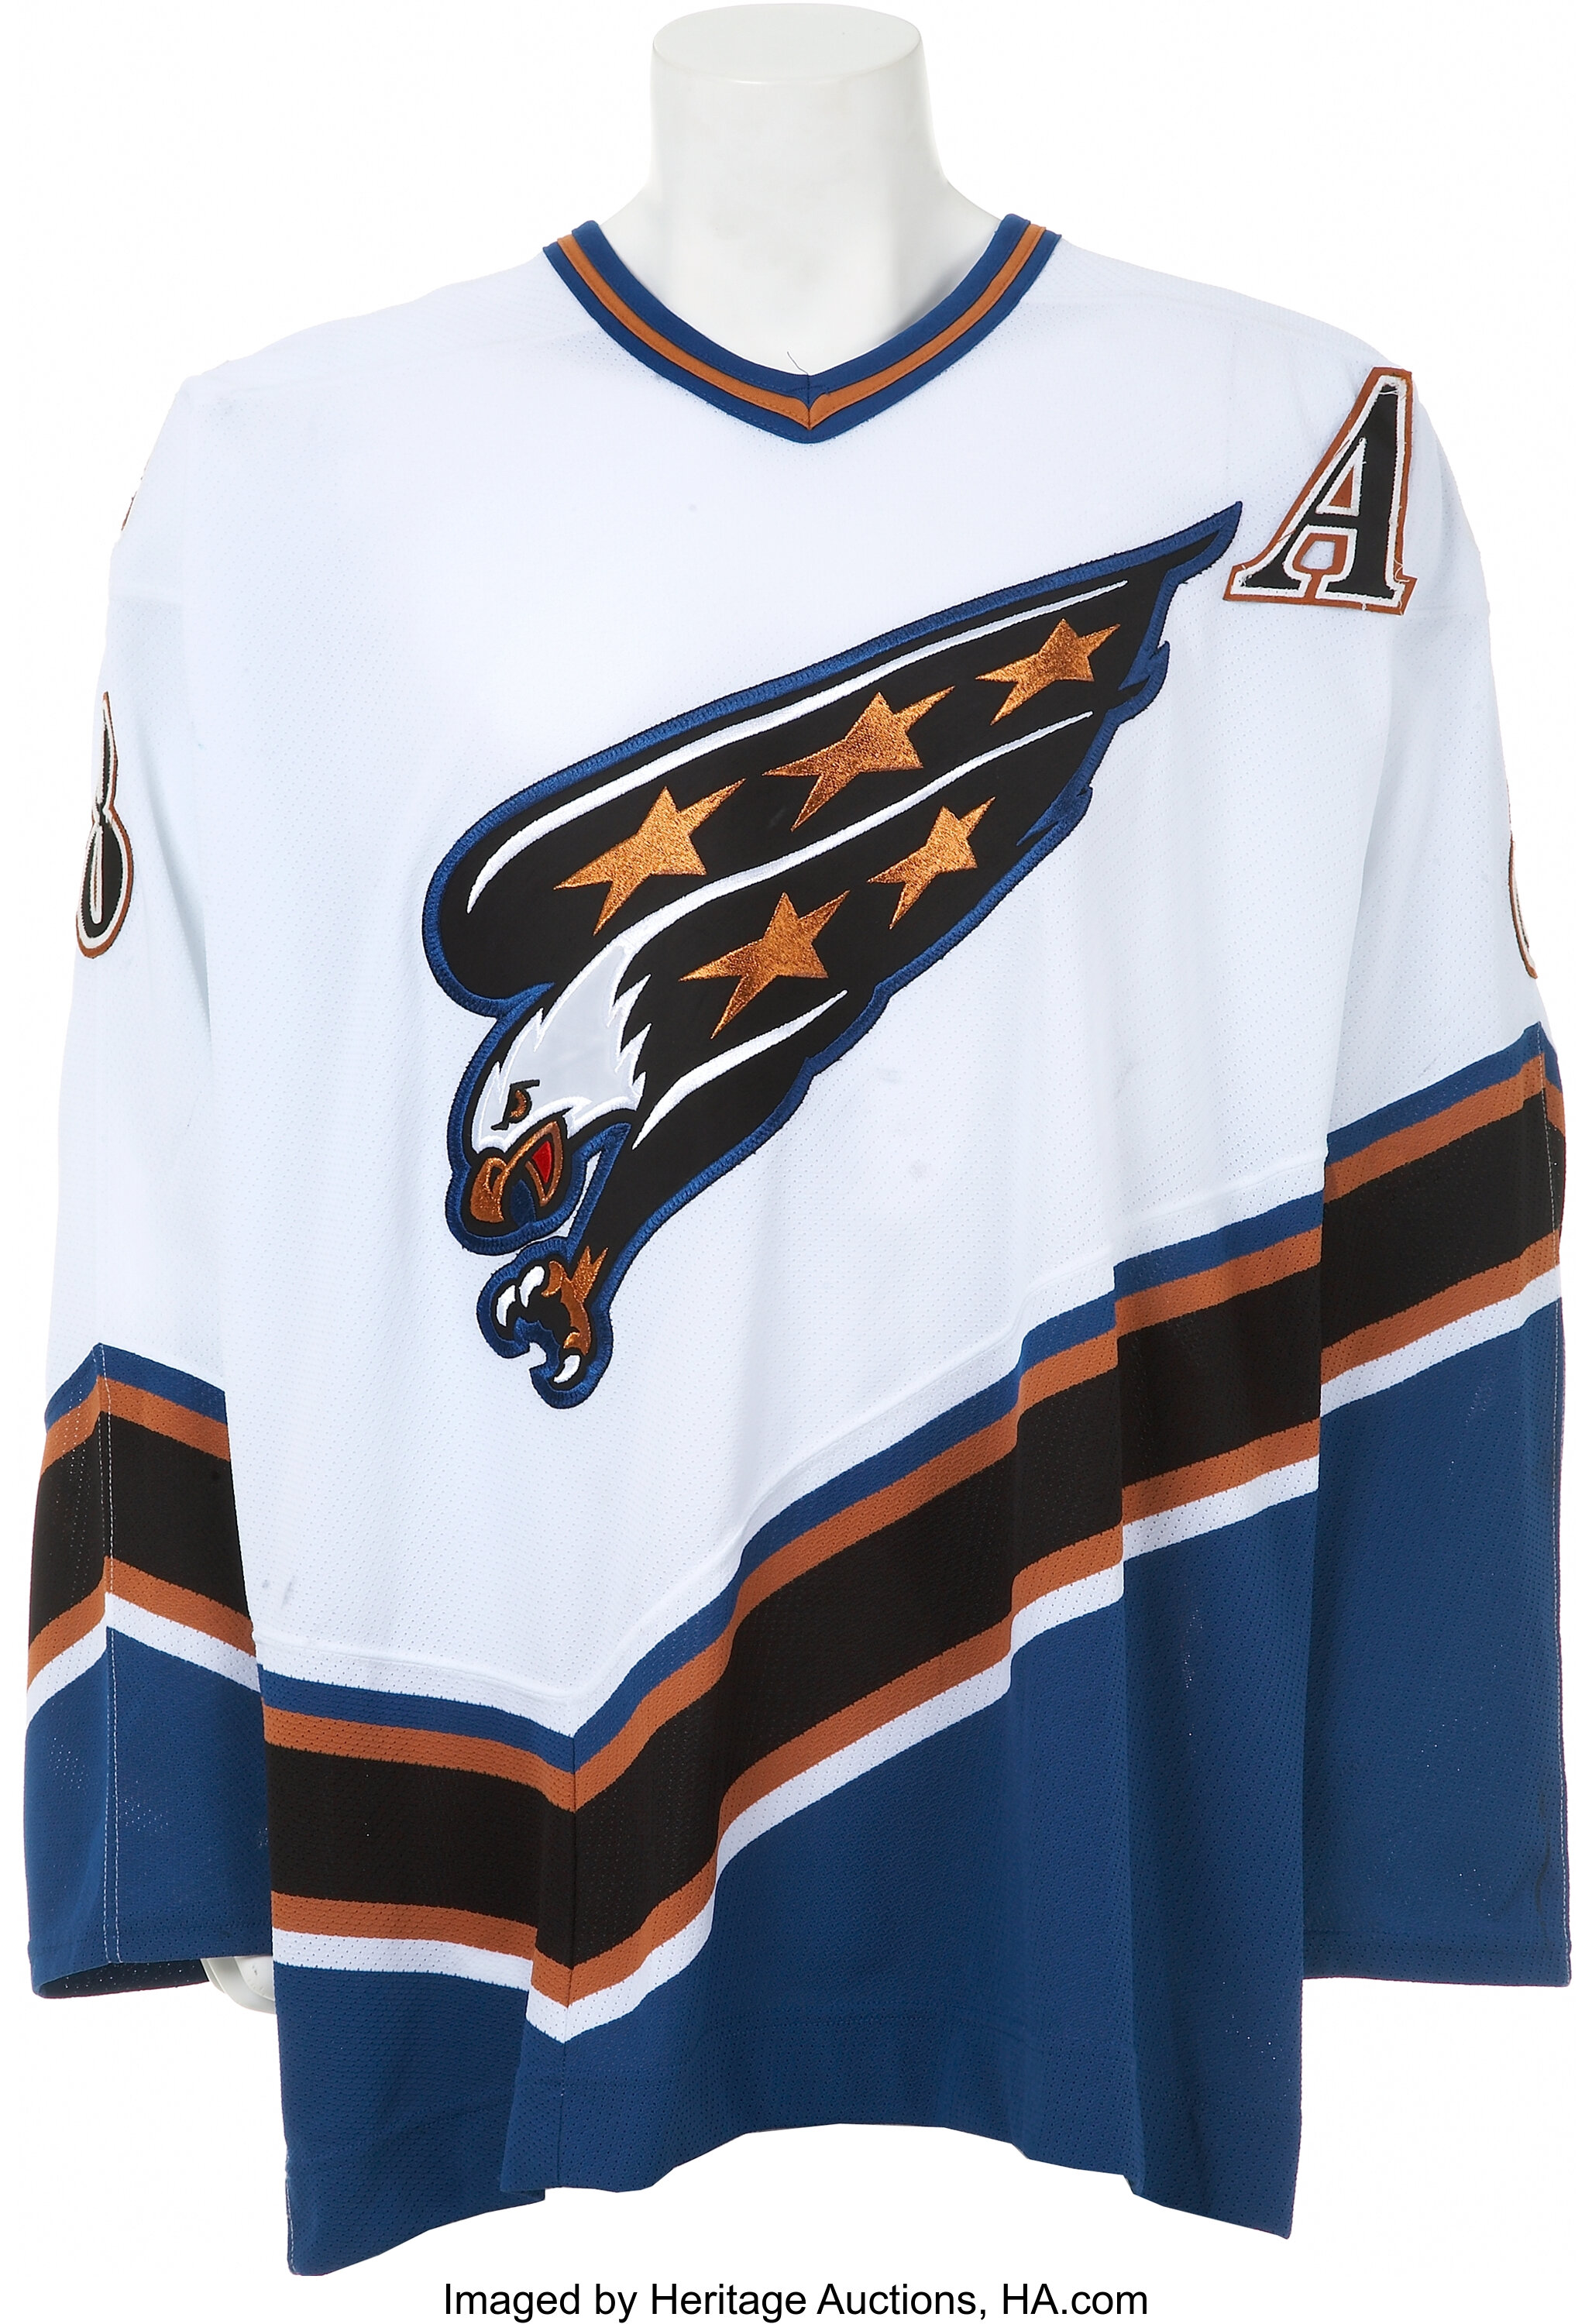 alexander ovechkin jersey vintage, 2006-07 Alexander Ovechkin Capitals  Game Worn Jersey - Photo Matched - Team Letter